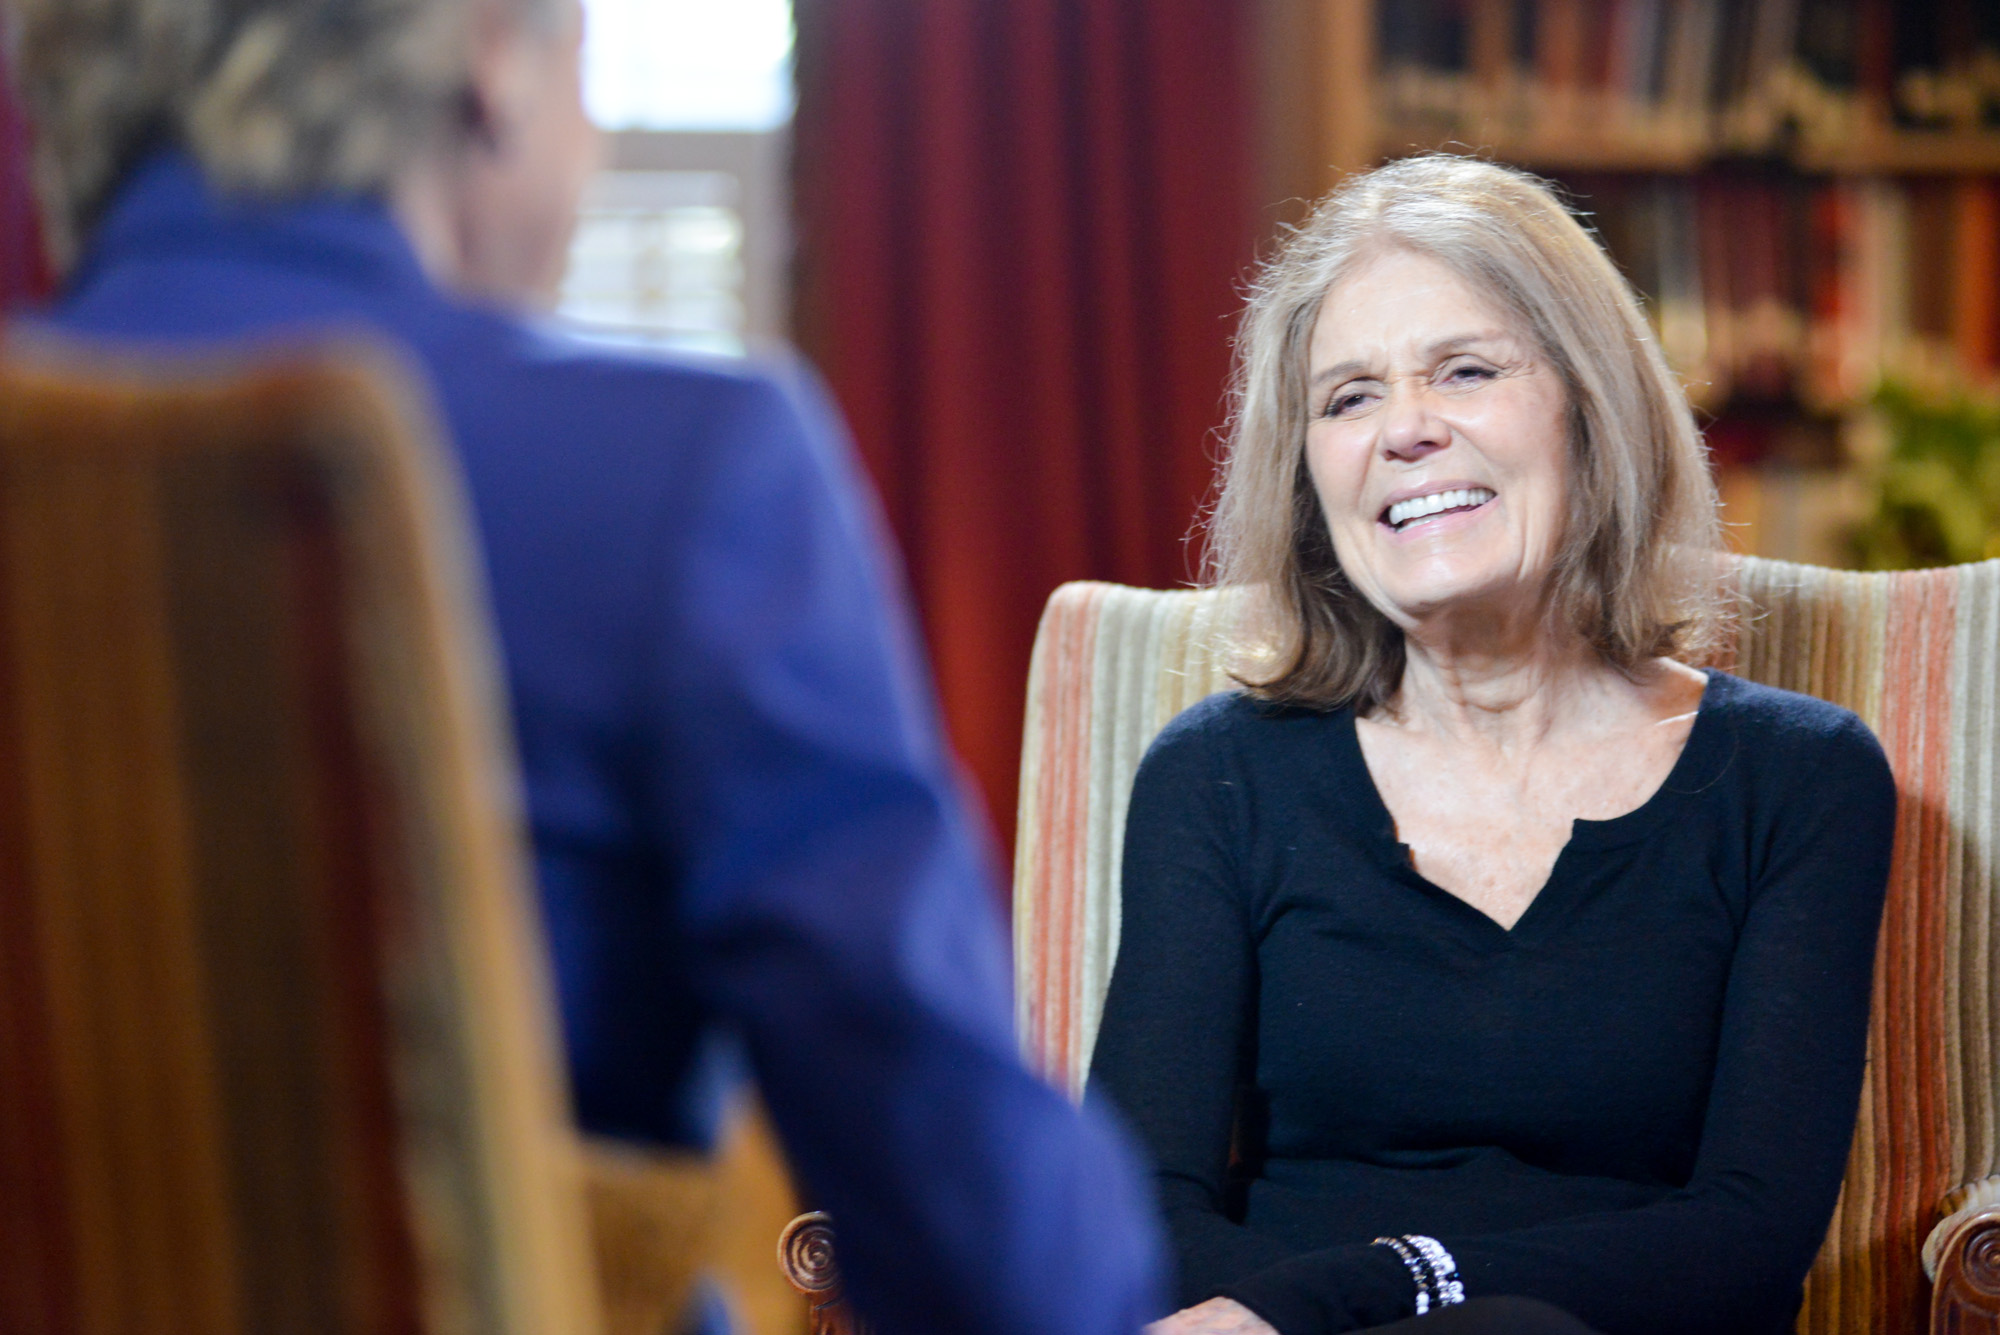 PHOTO: Cokie Roberts interviews Gloria Steinem for "This Week" at the University Club in Washington, Oct. 29, 2015